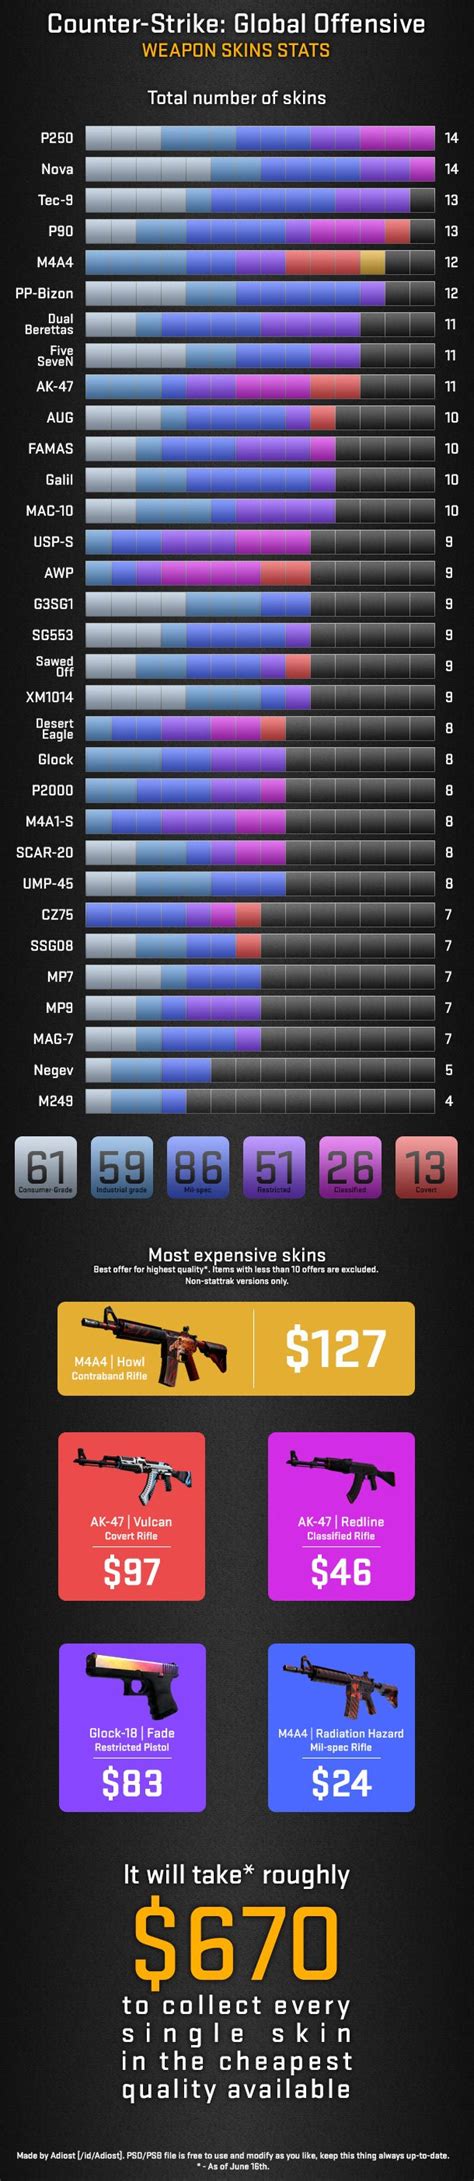 Csgo Weapon Skins Stats Infographic